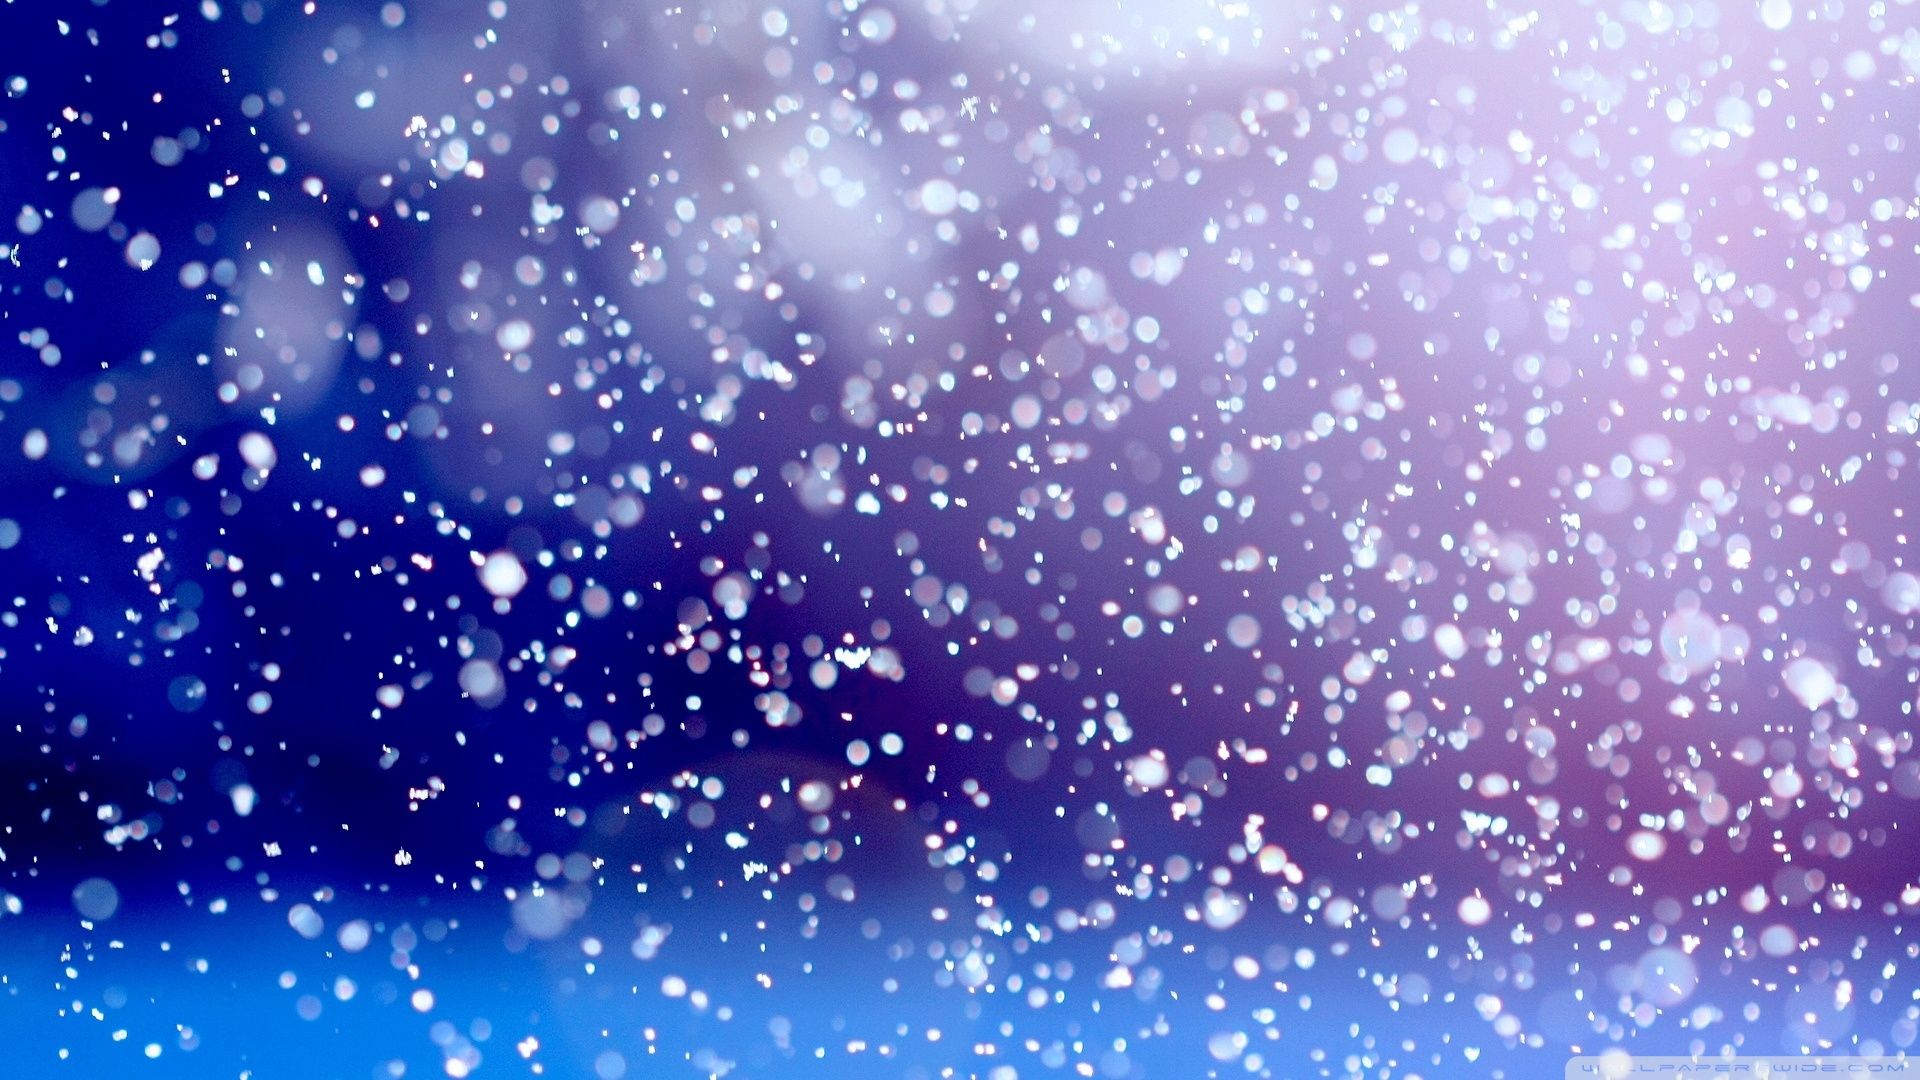 Falling Snow Wallpaper Background